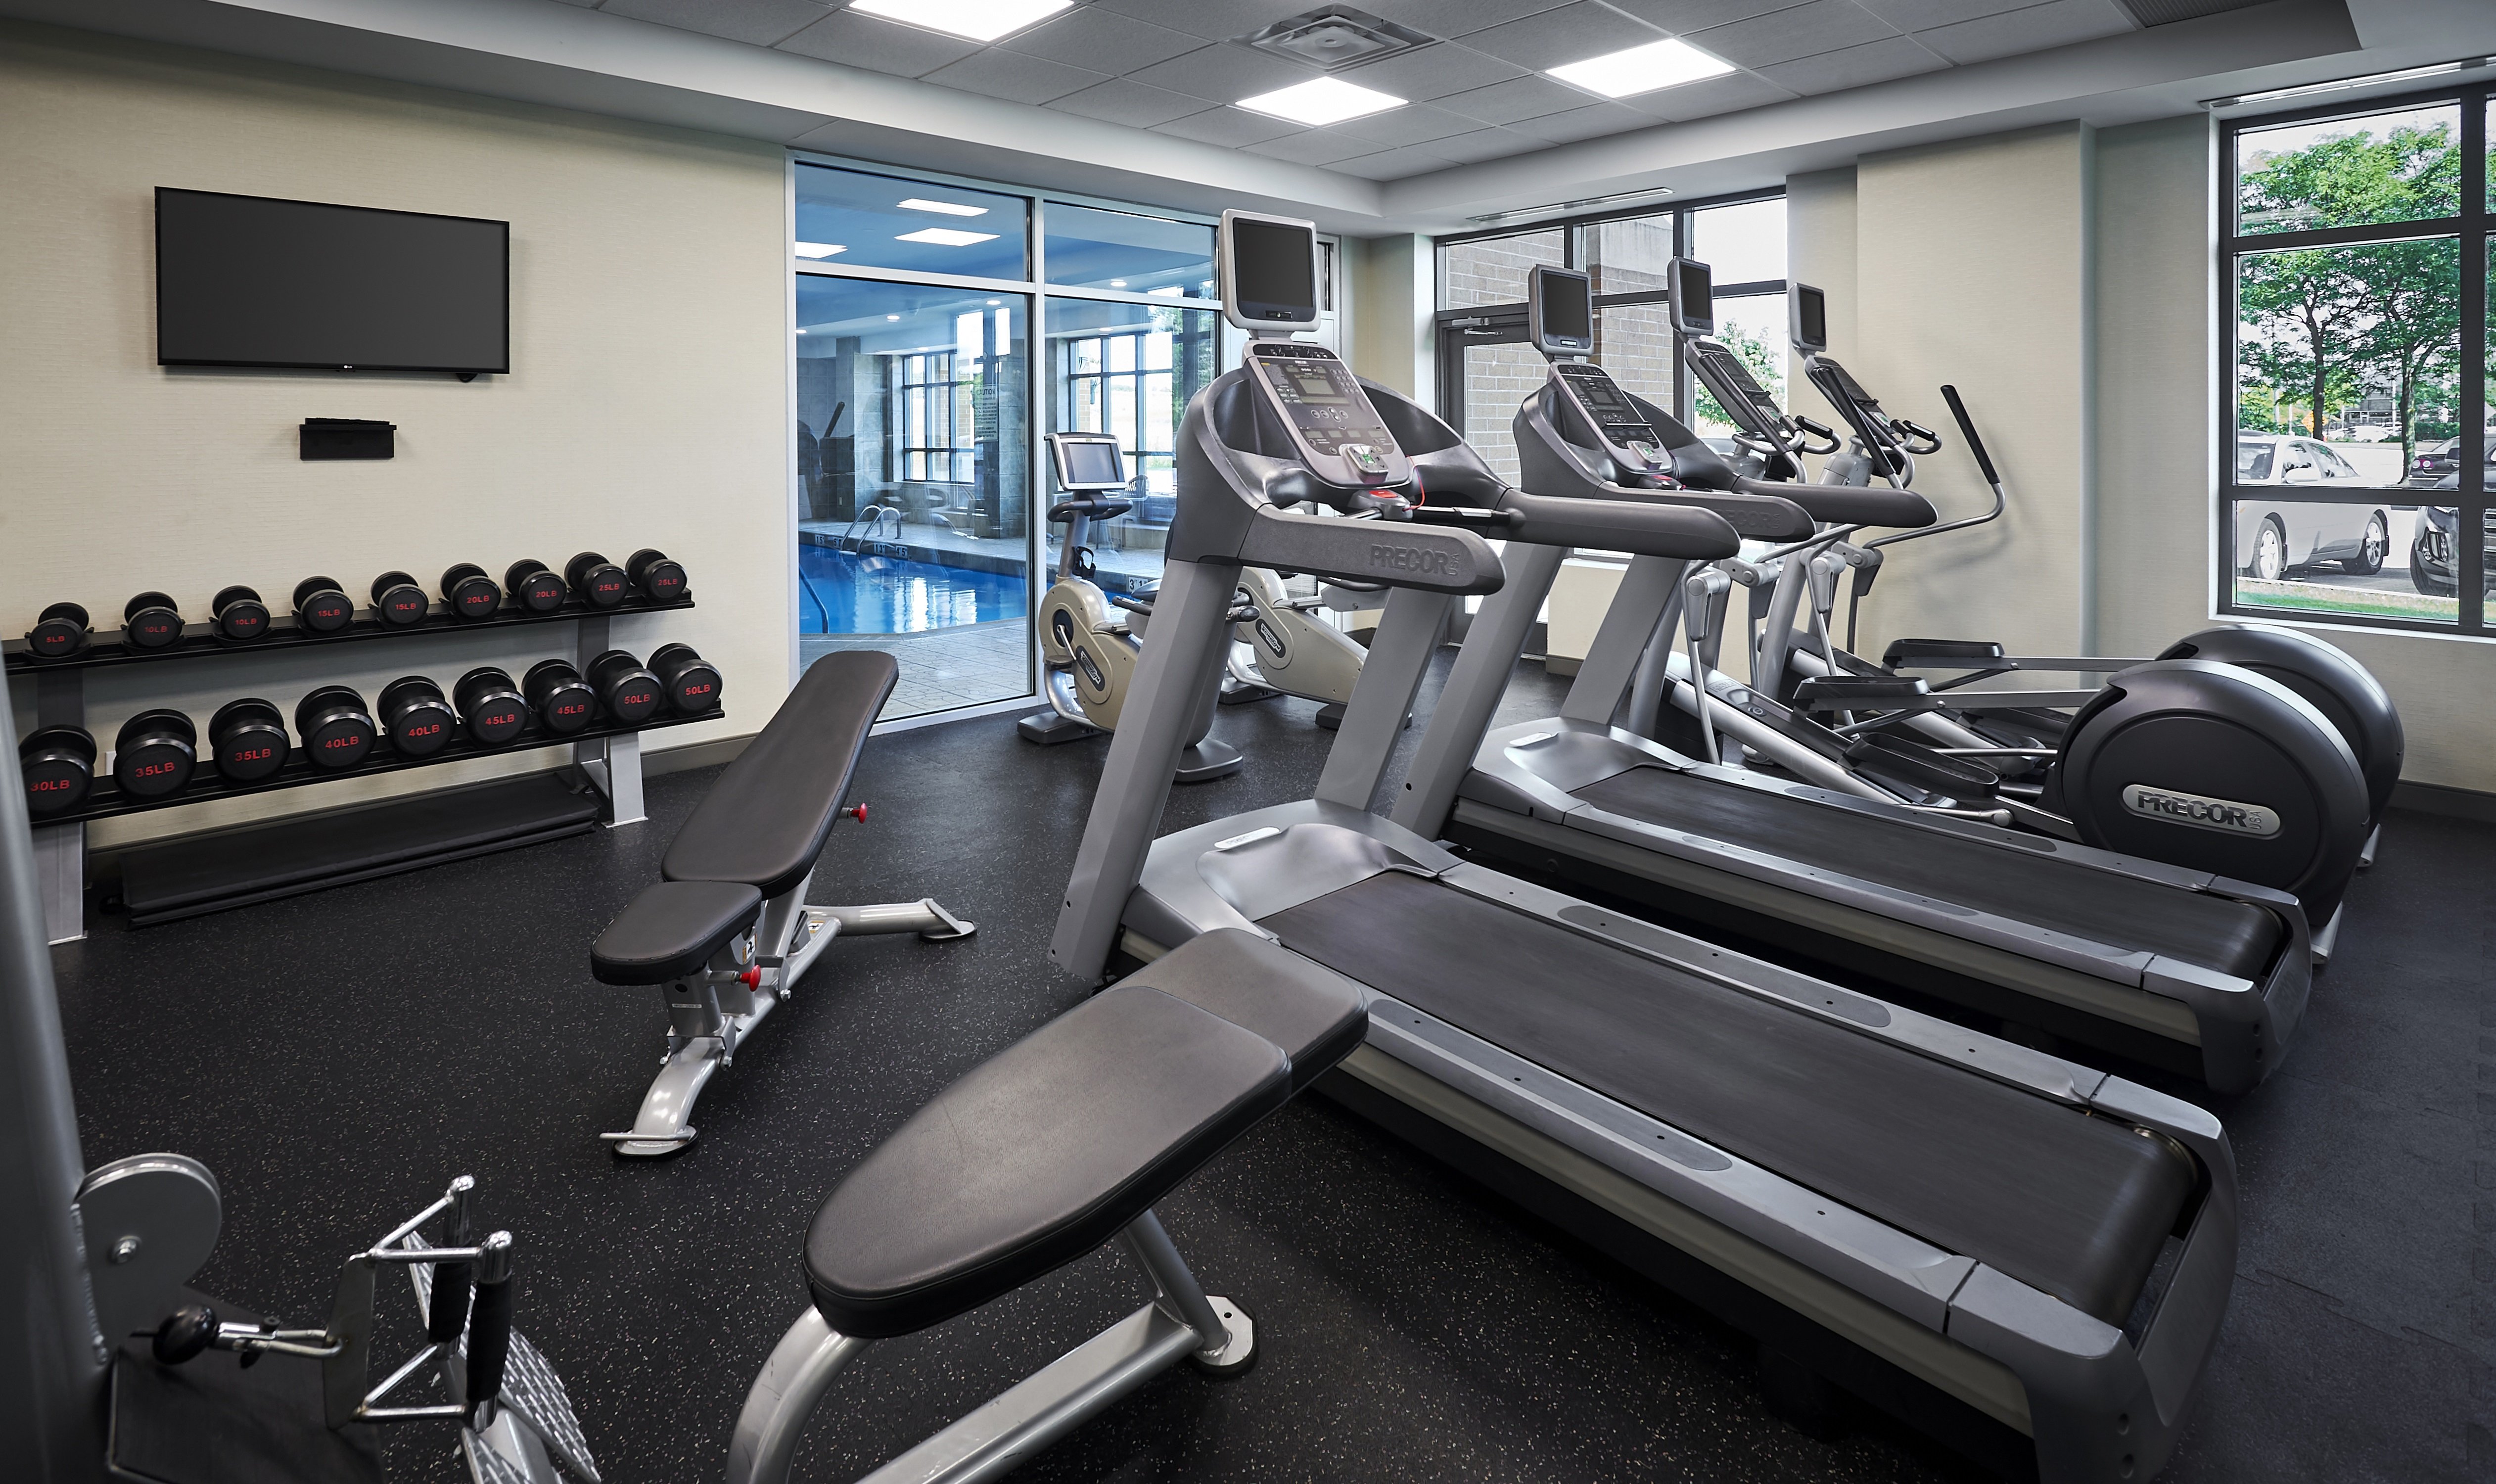 Refresh and Renew in our Renovated Fitness Facilities